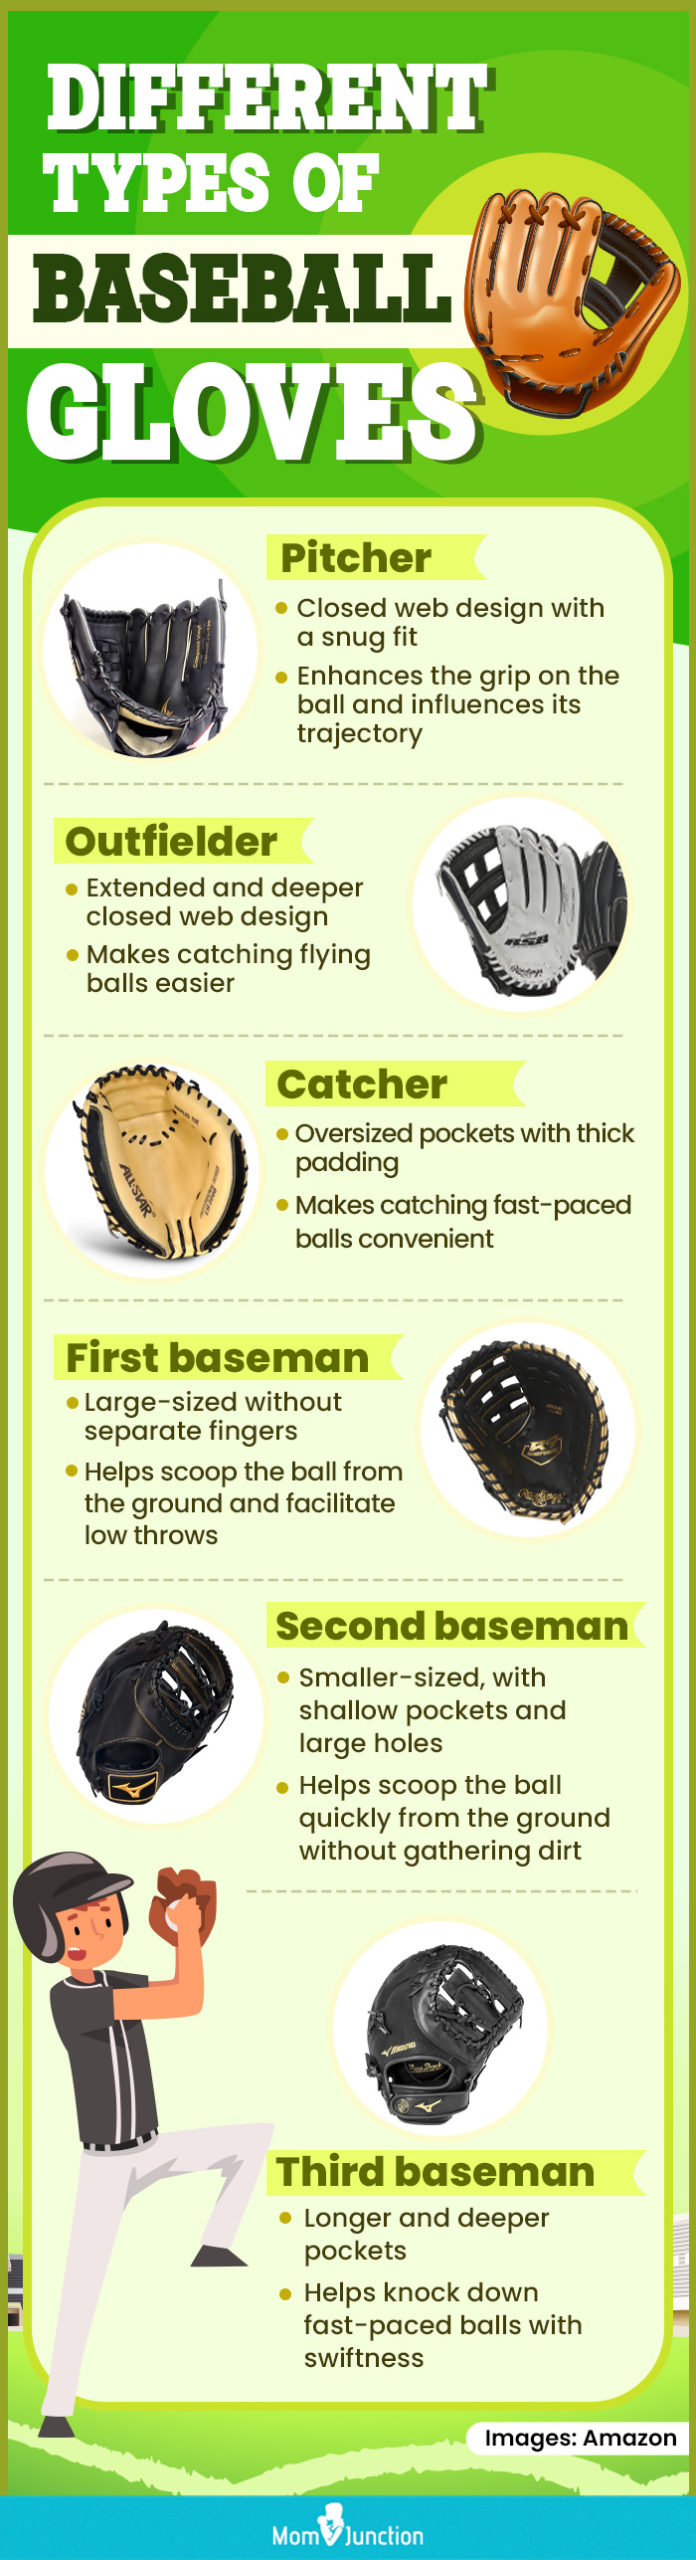 Different Types Of Baseball Gloves (infographic)